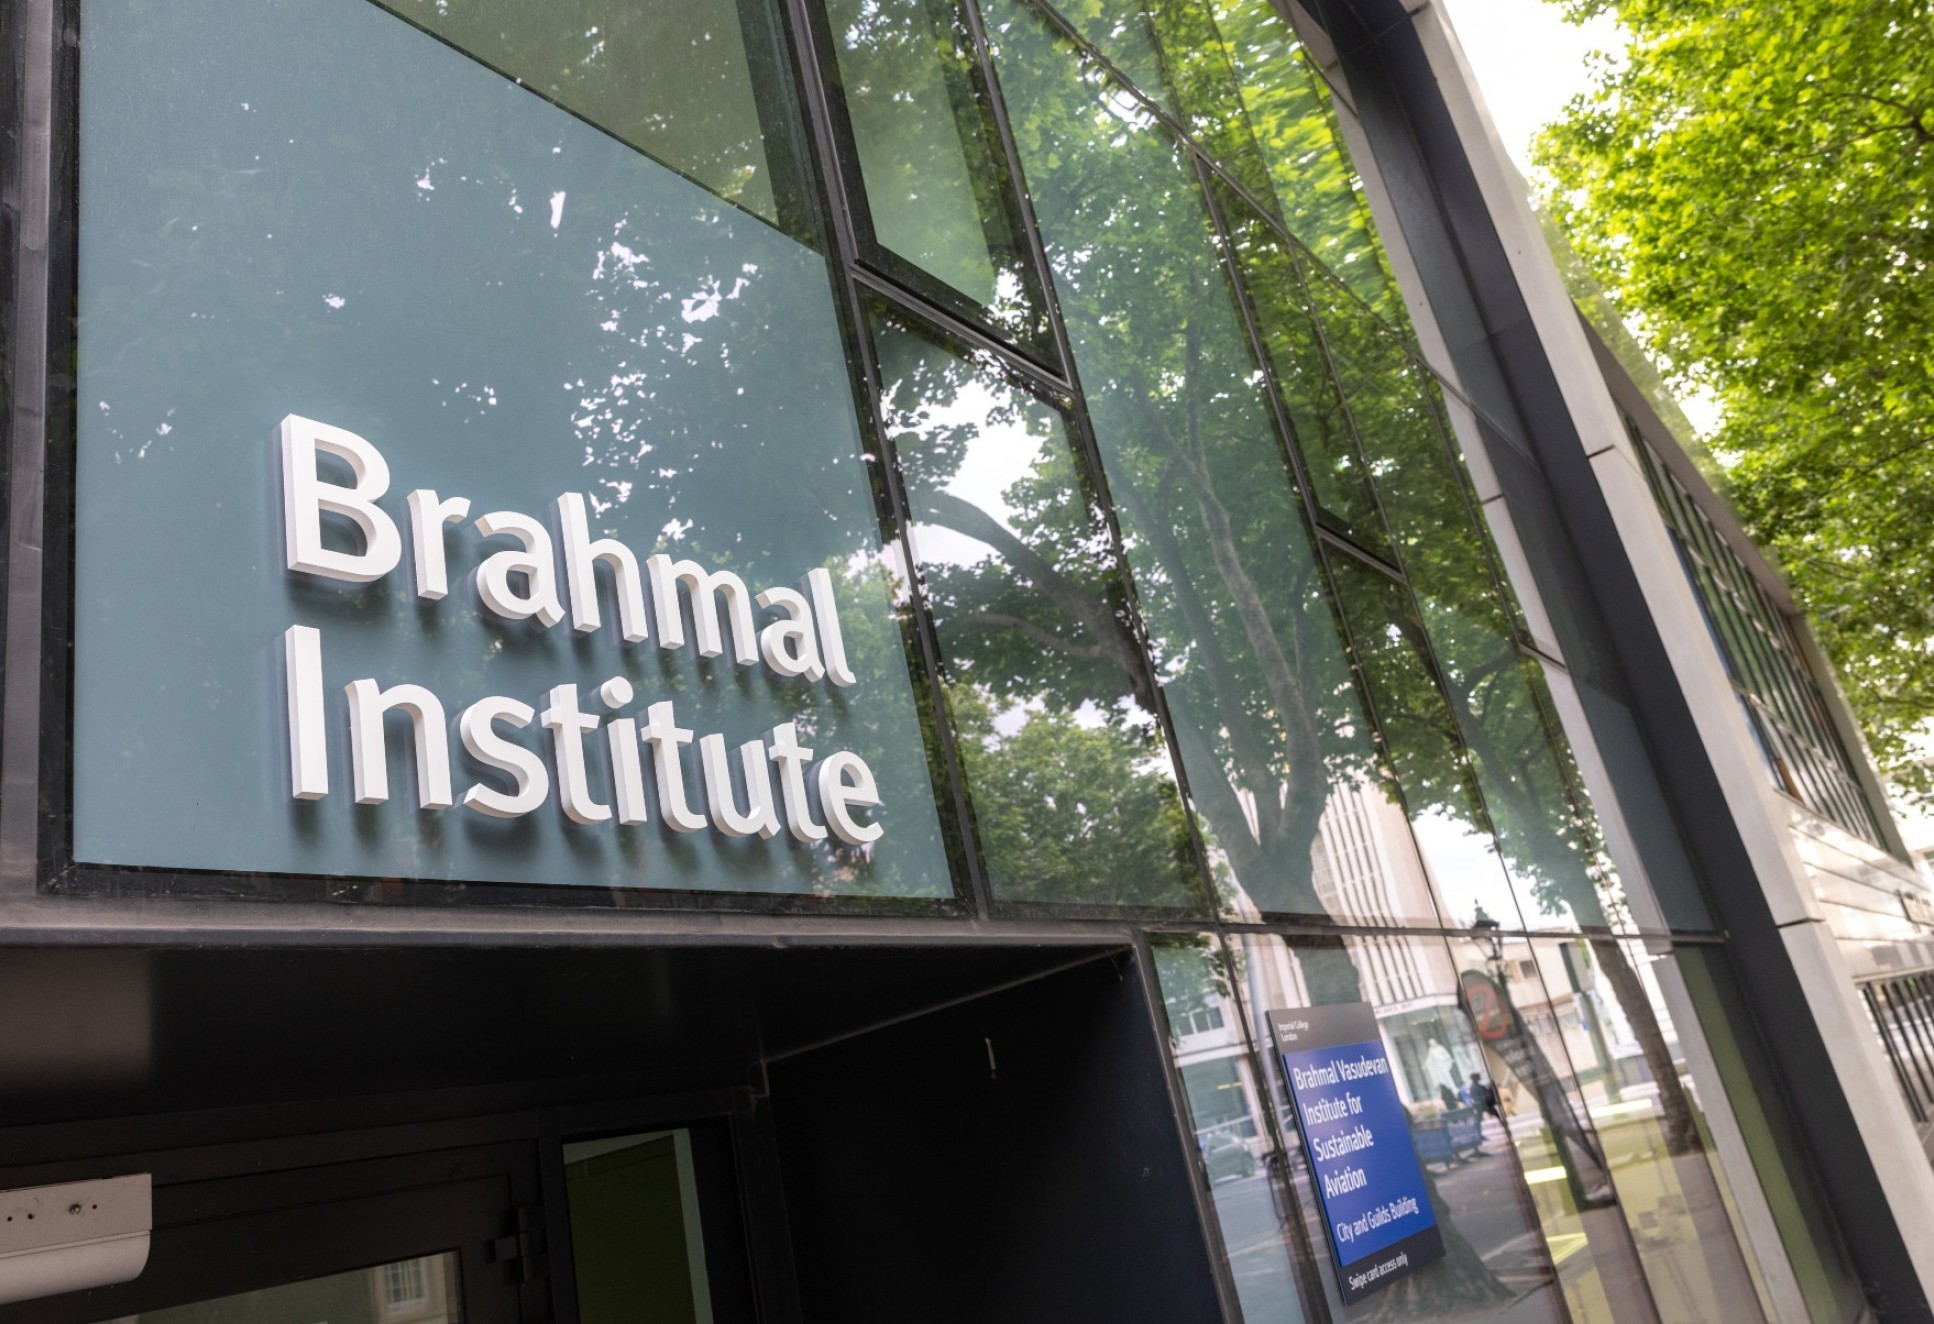 An image of the entrance to the Brahmal Institute at Imperial 